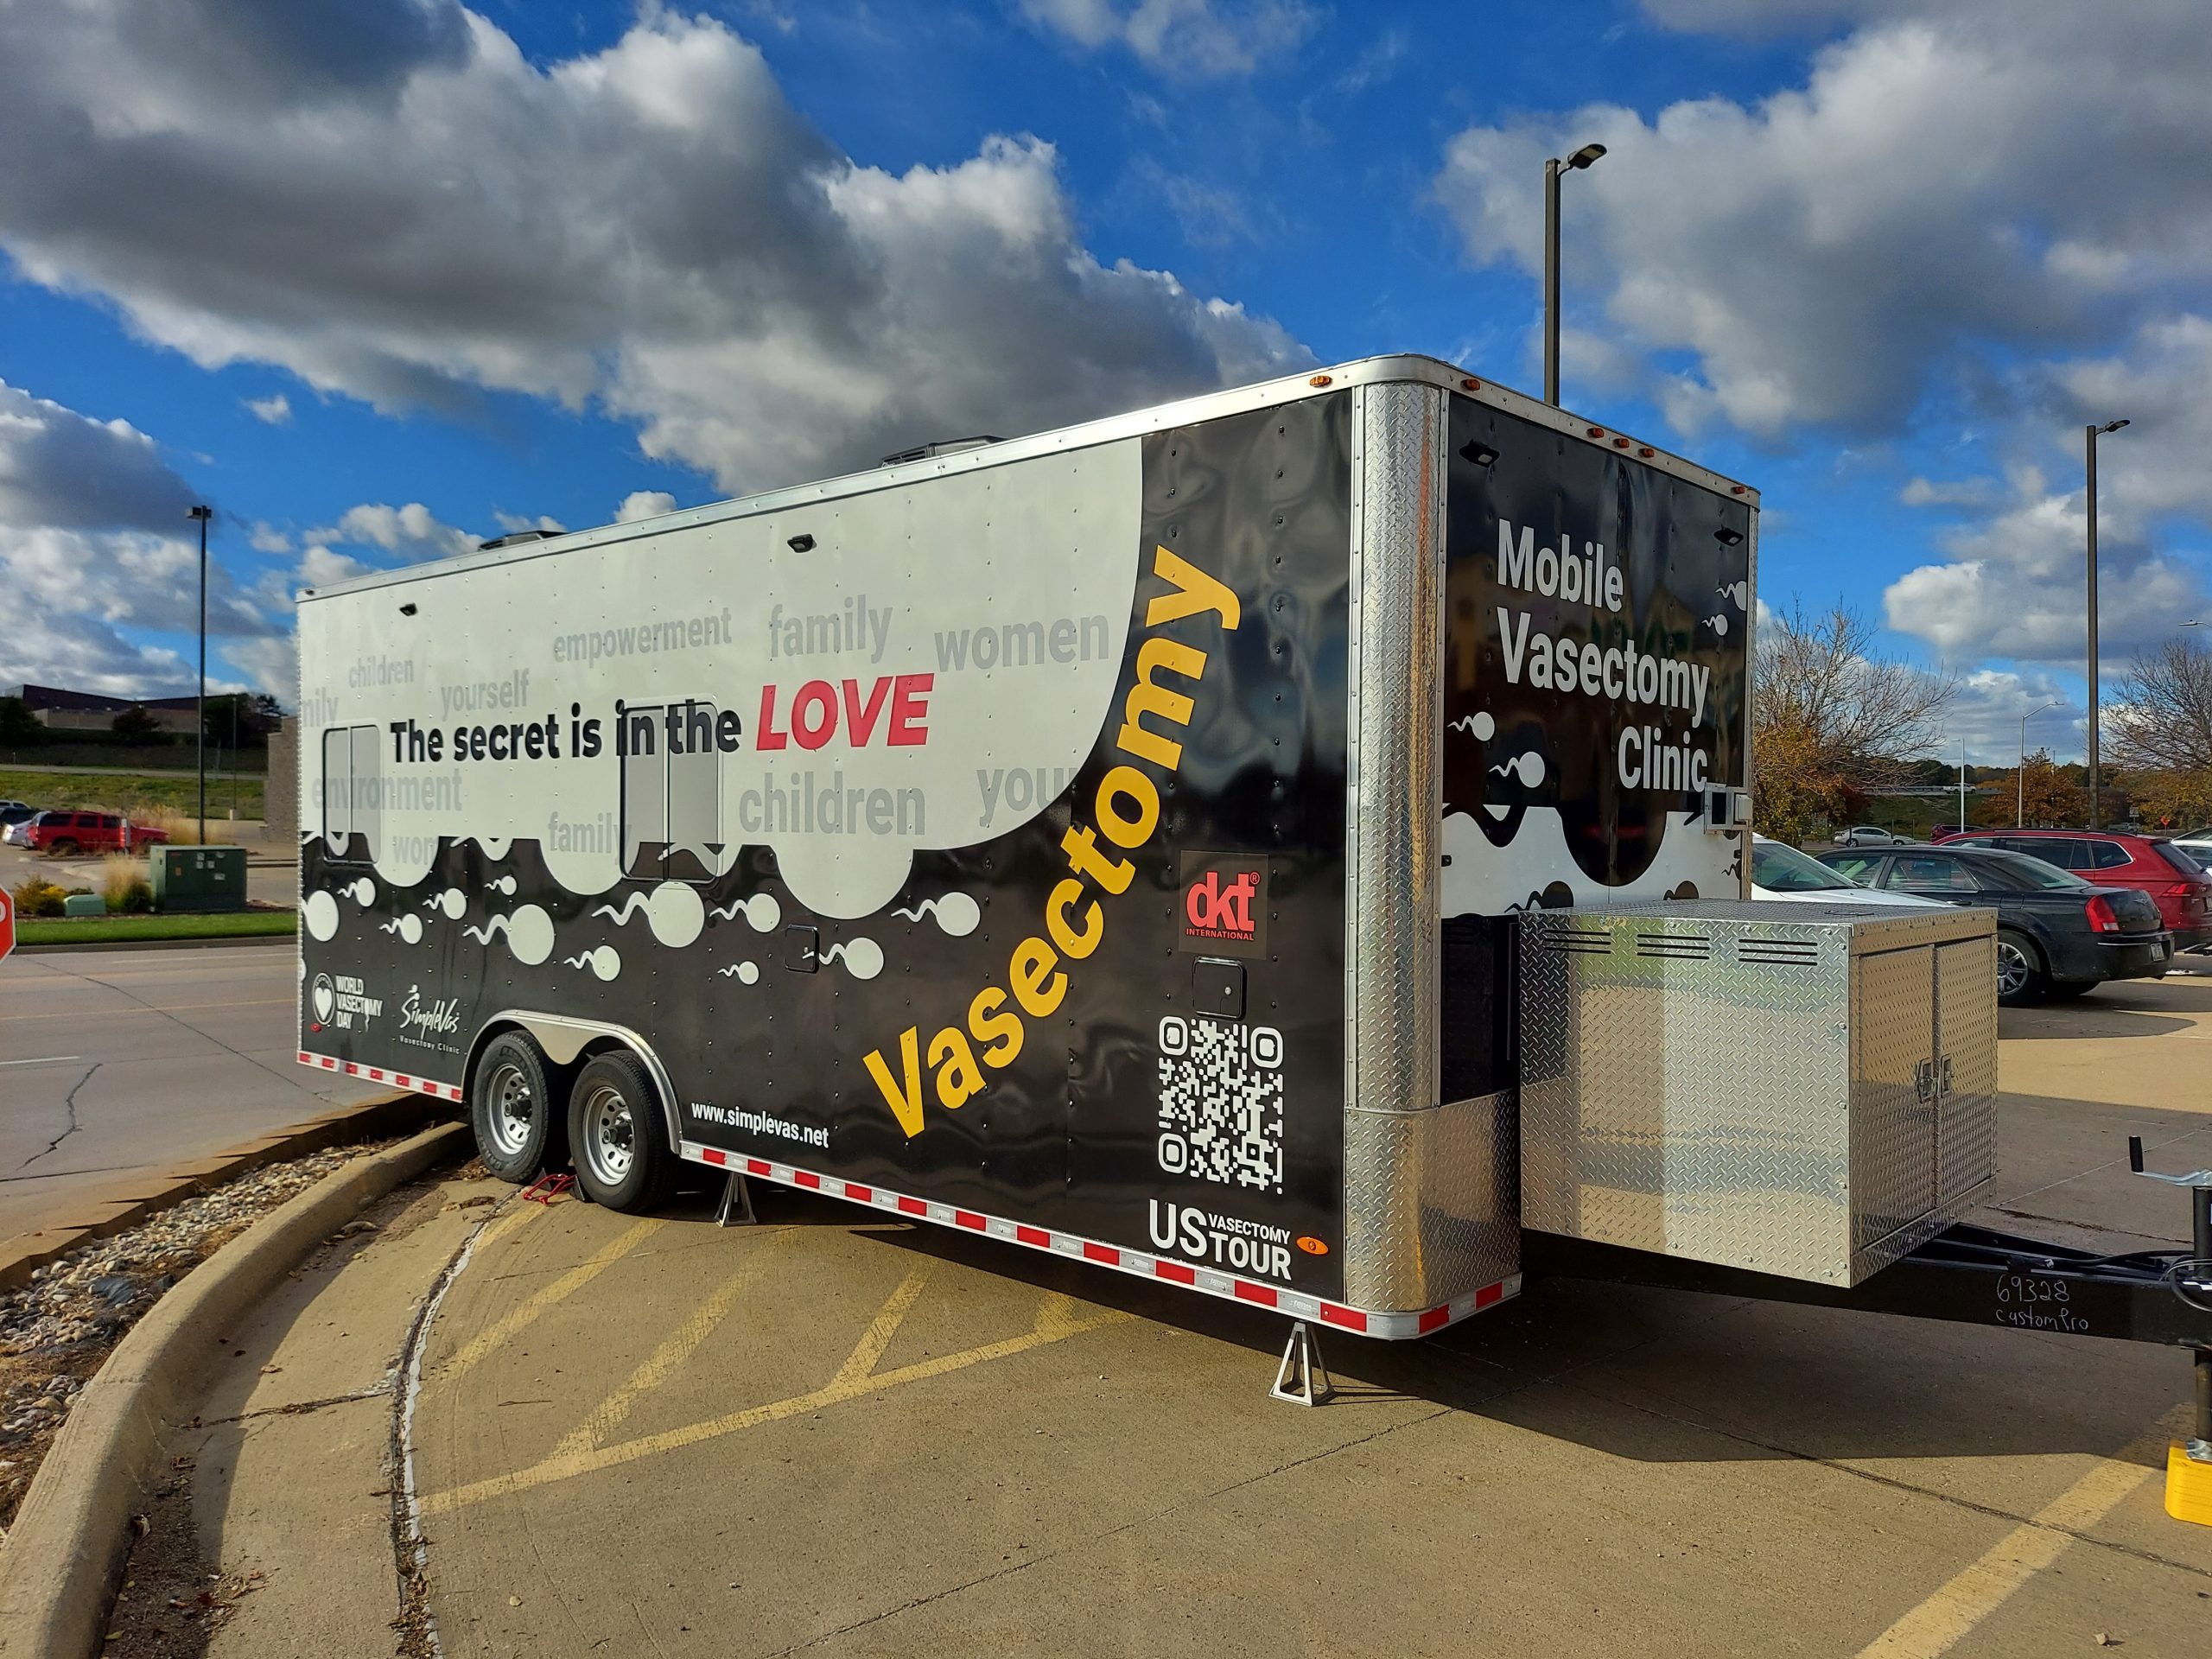 Mobile Clinic, Vasectomy Services on Wheels